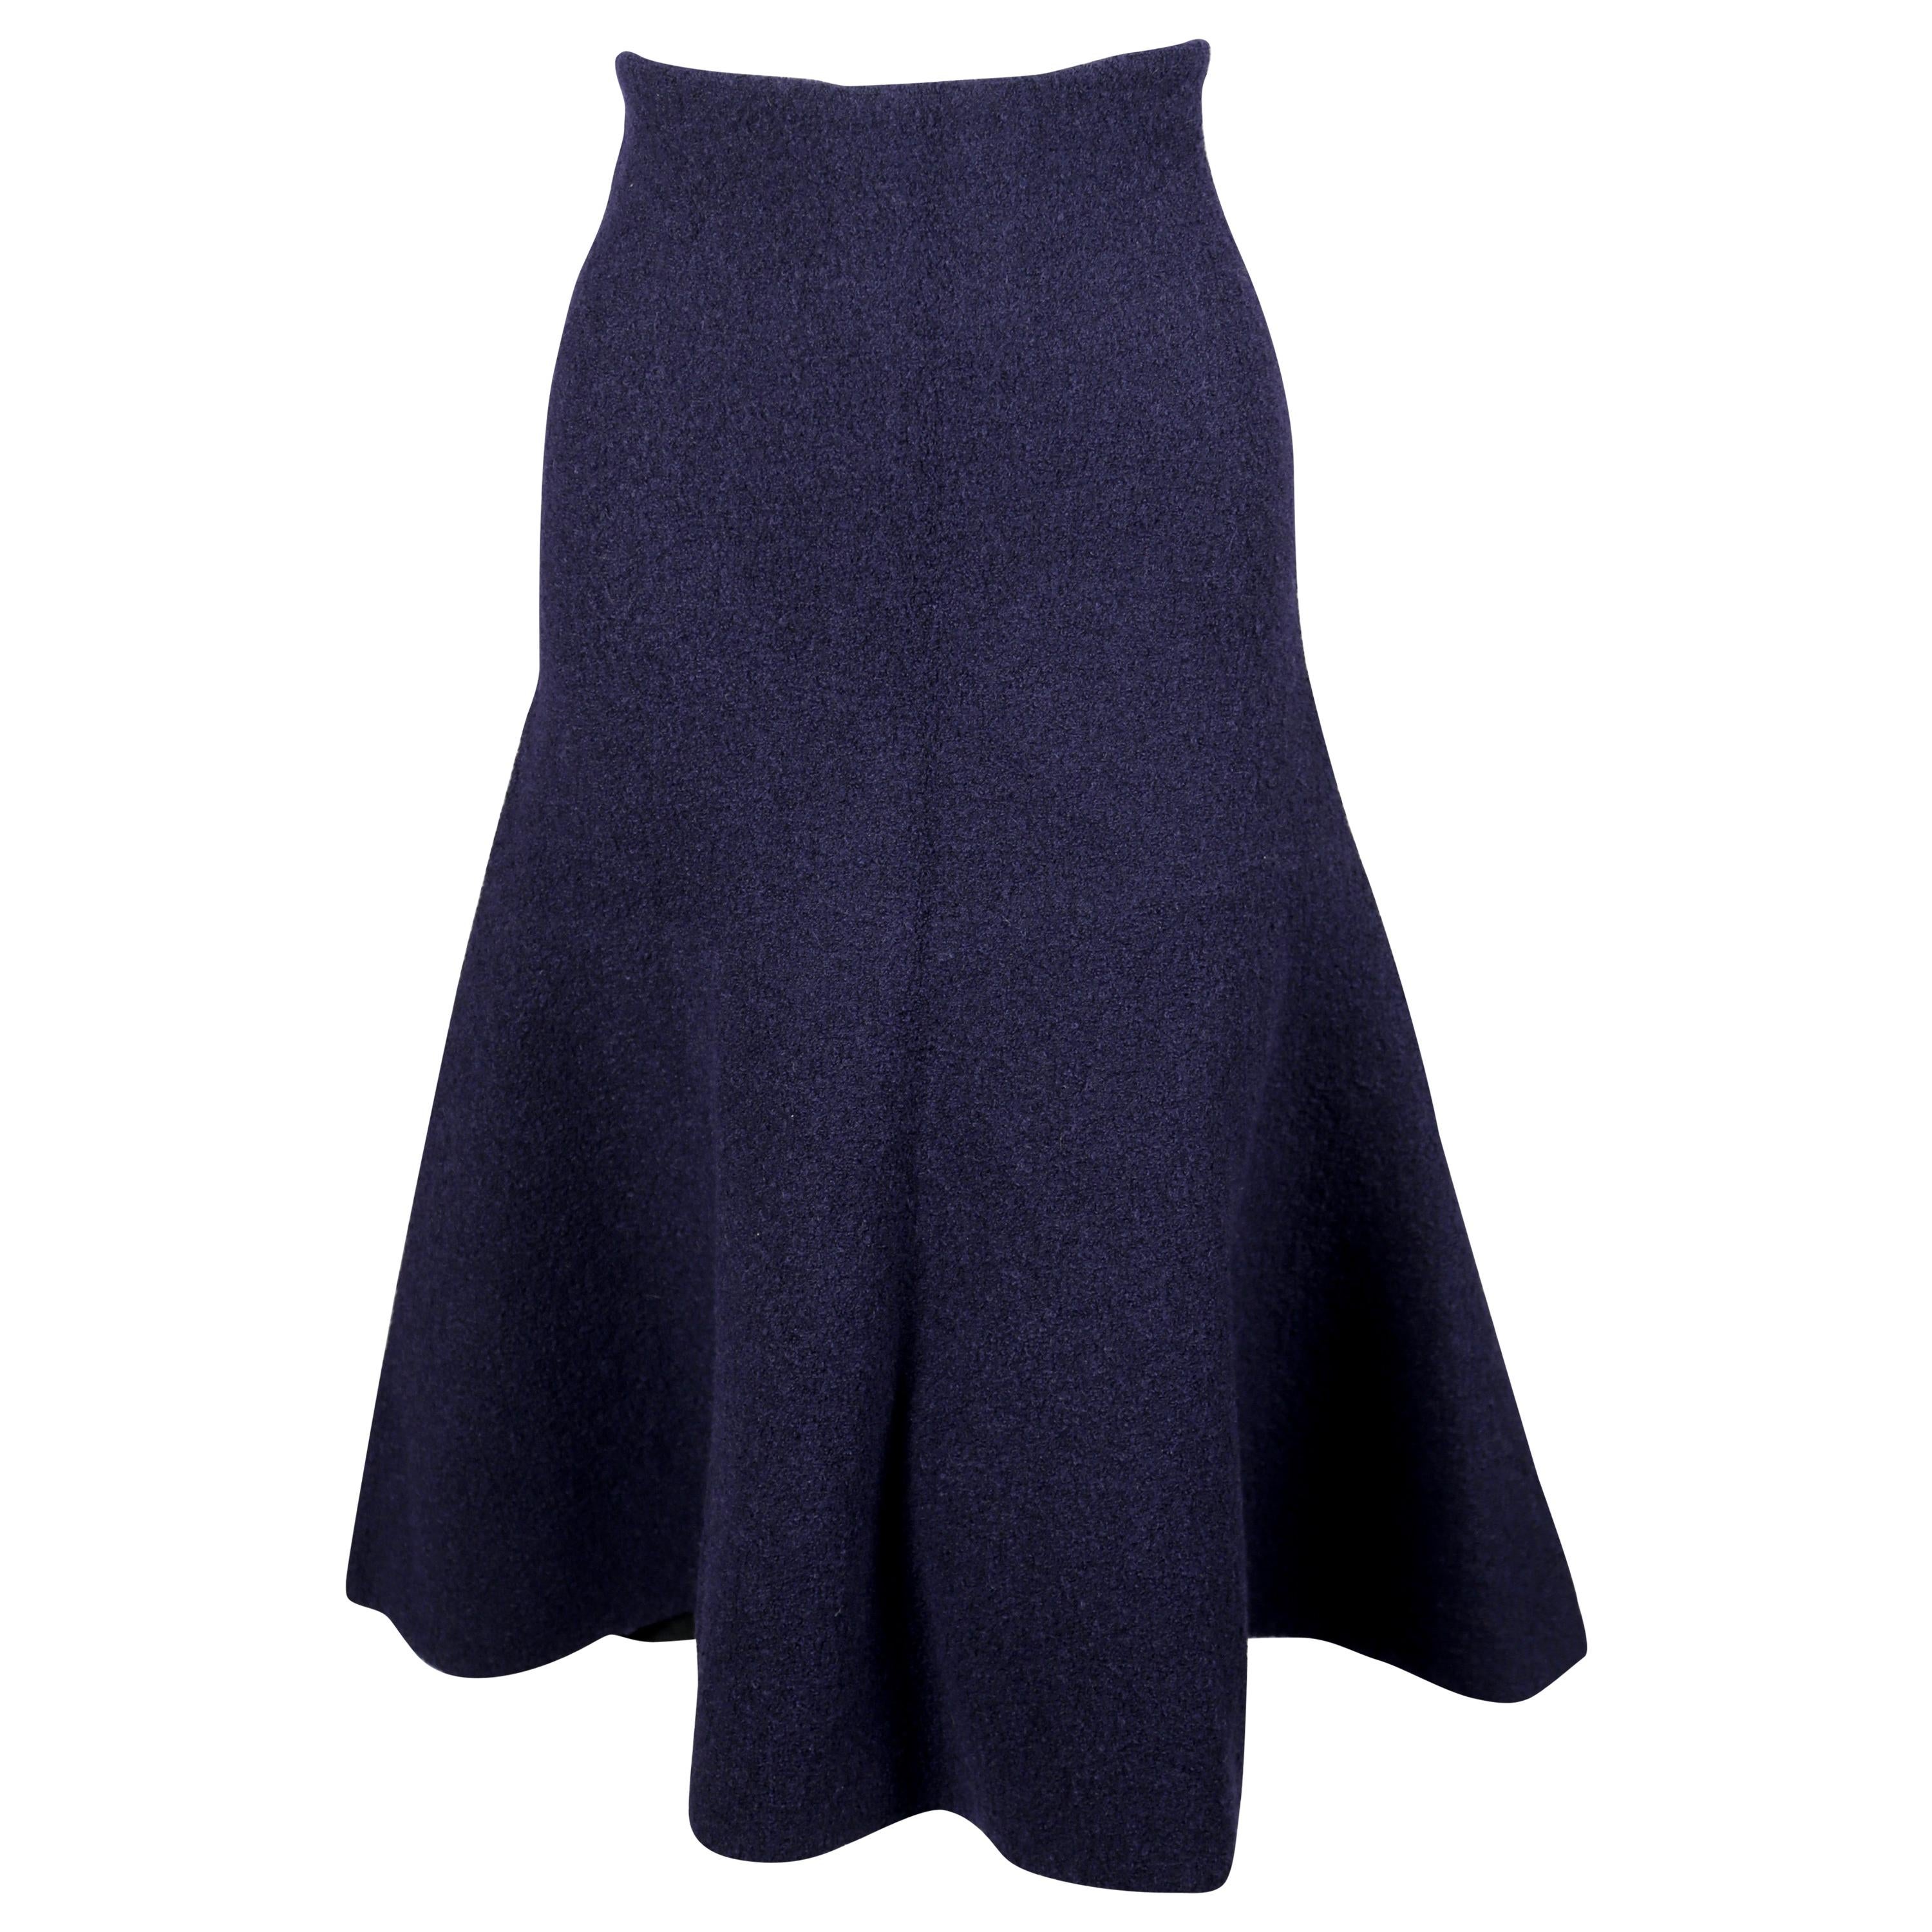 CELINE by Phoebe Philo navy blue textured knit trumpet skirt - runway 2013